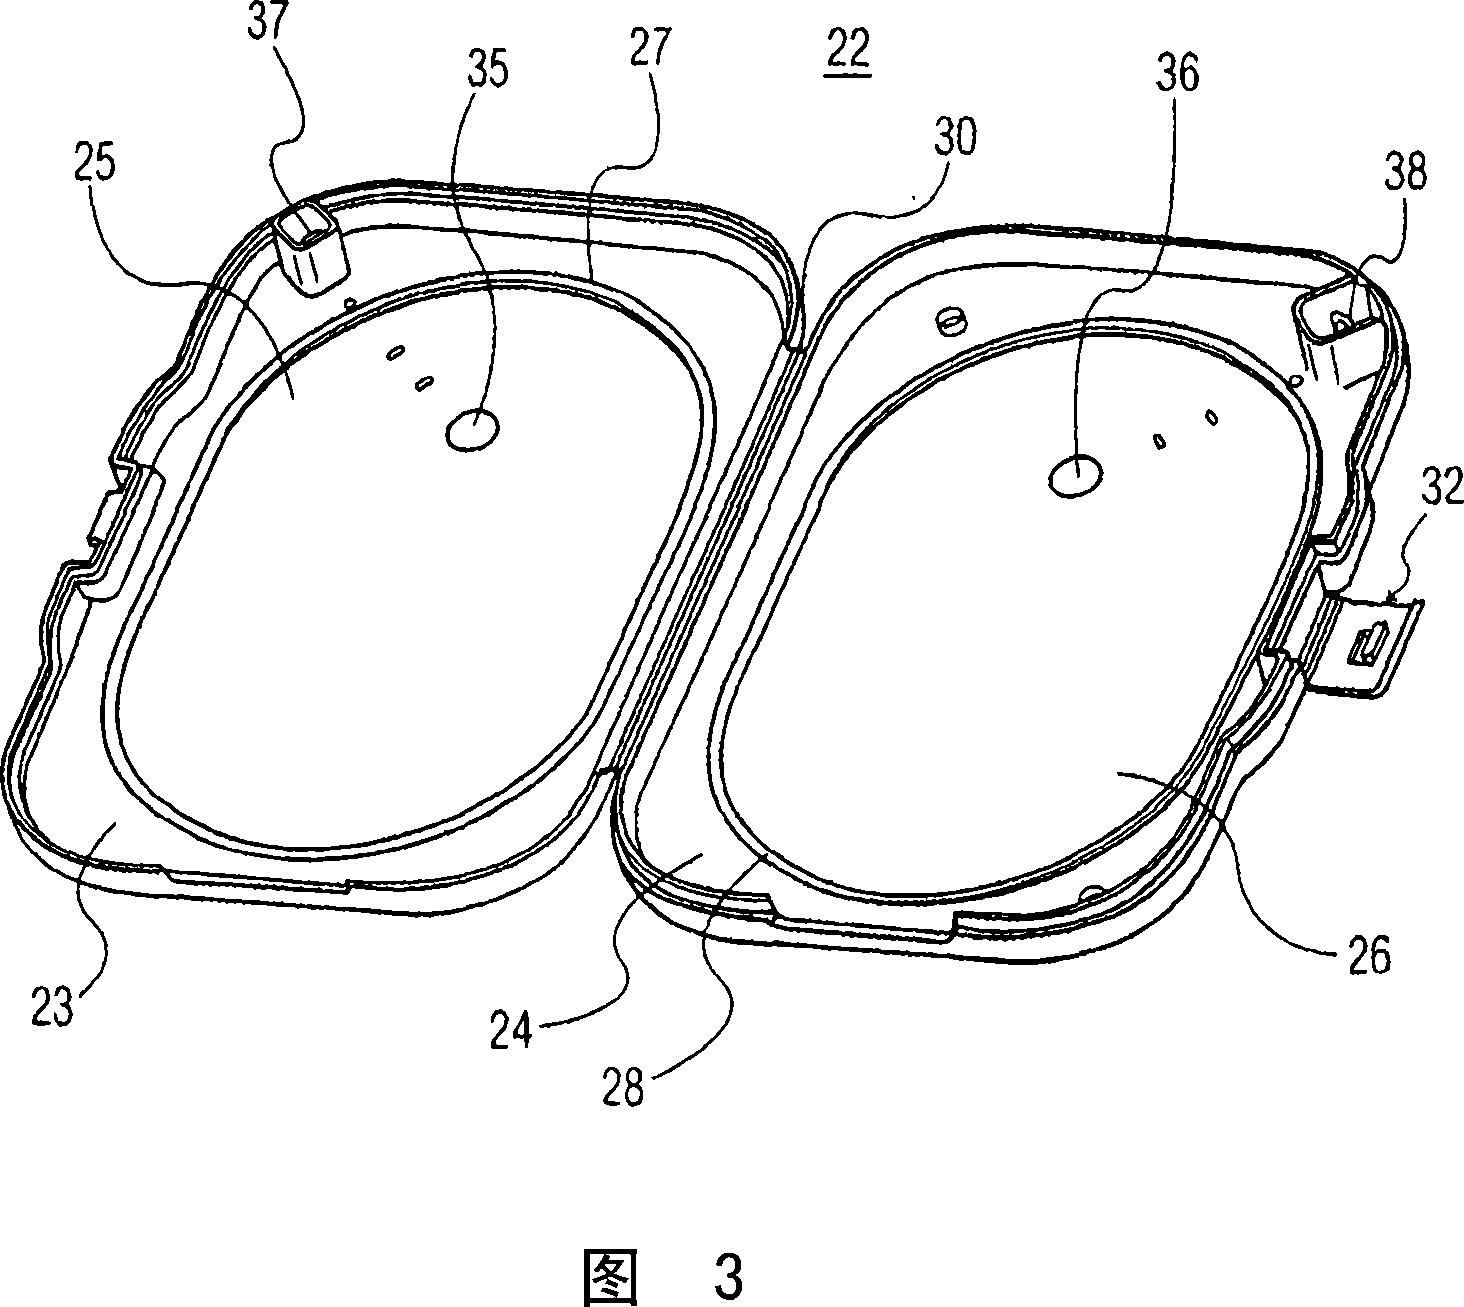 Electrode and enclosure for cardiac monitoring and treatment